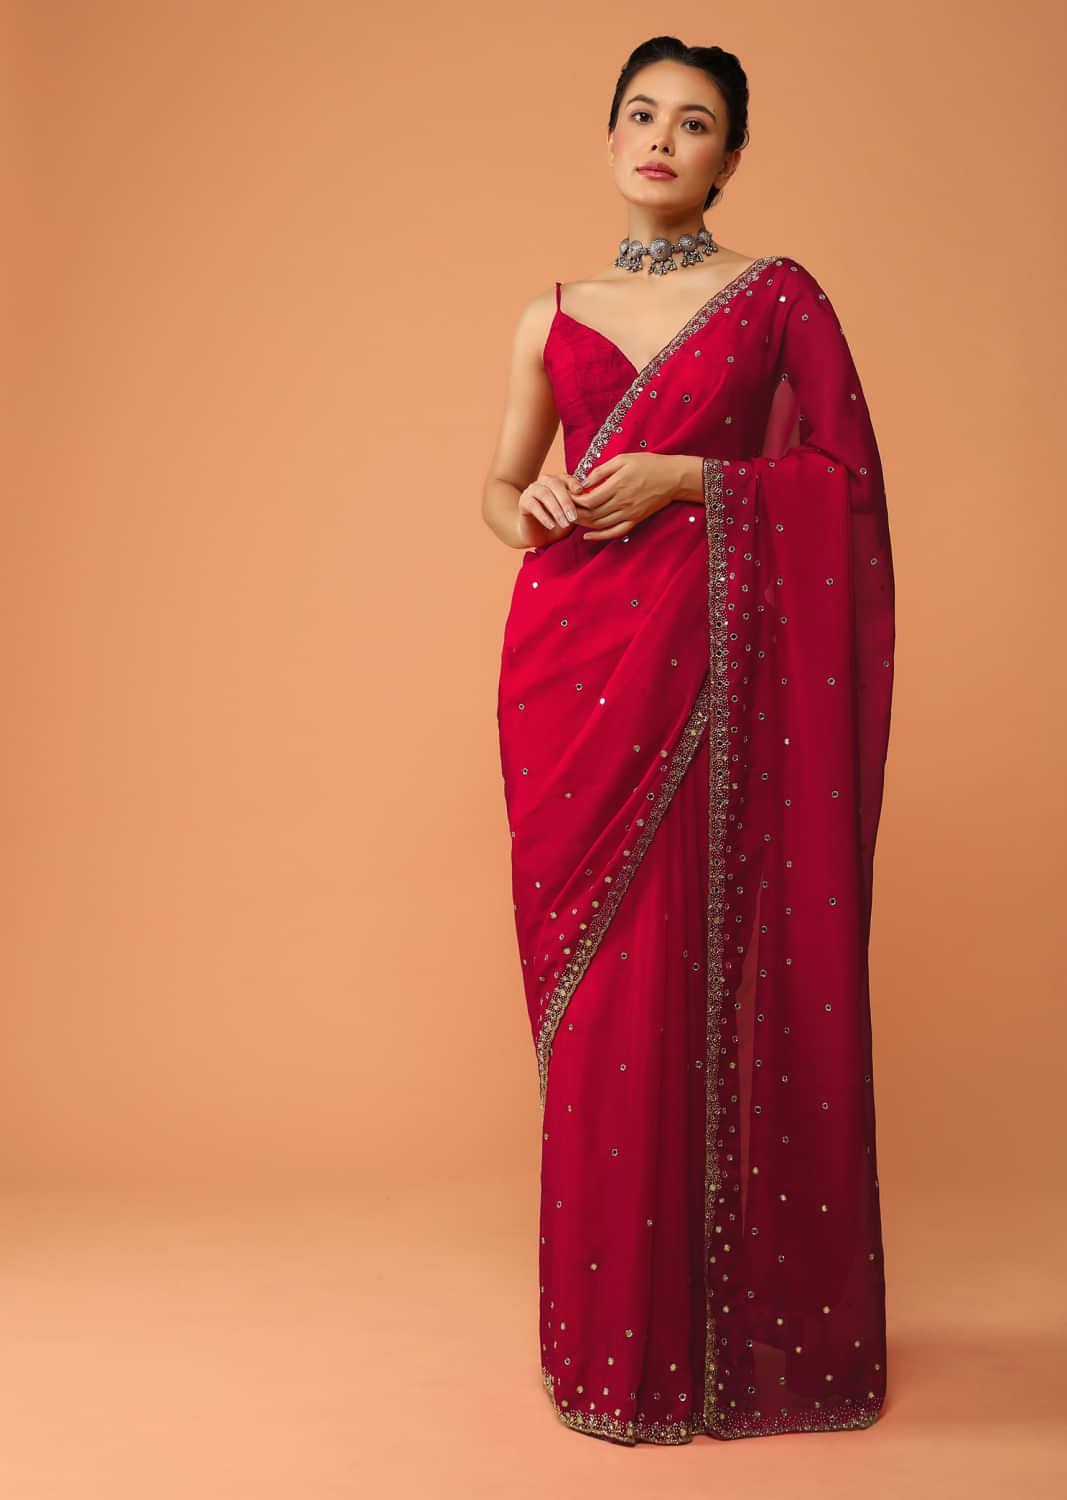 Fuchsia Pink Saree In Organza With Mirror And Cut Dana Embroidered Buttis And Border Design  